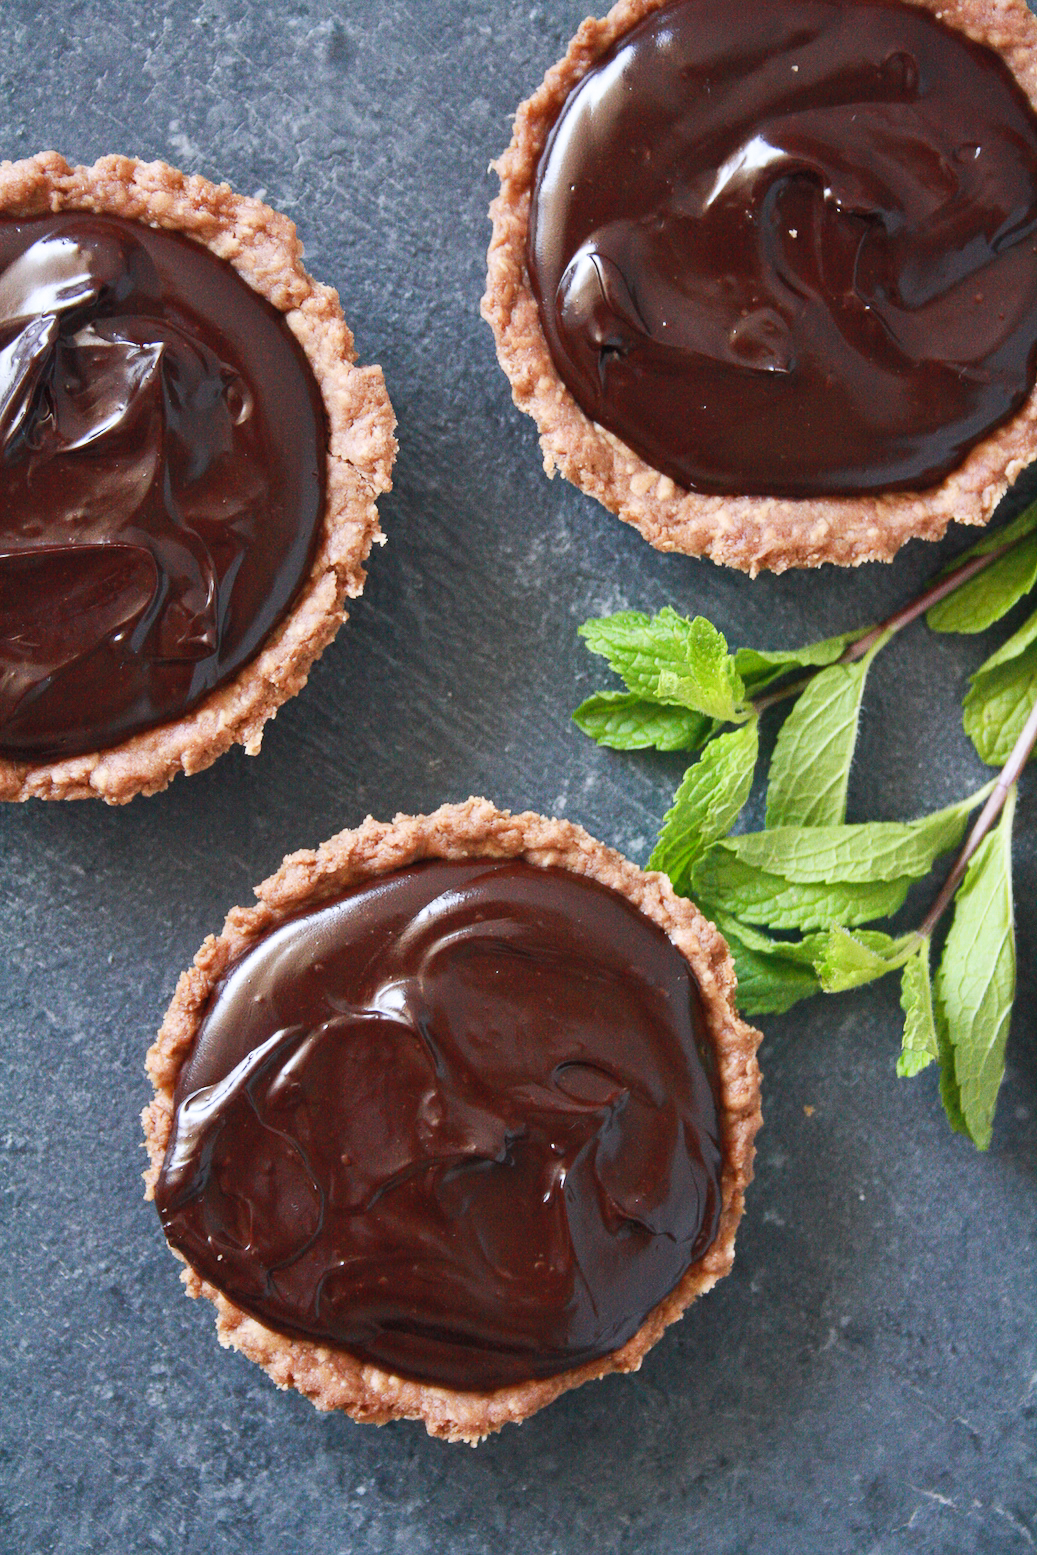 Buttery chocolate tart shells filled with a rich, fresh mint infused, chocolate ganache!